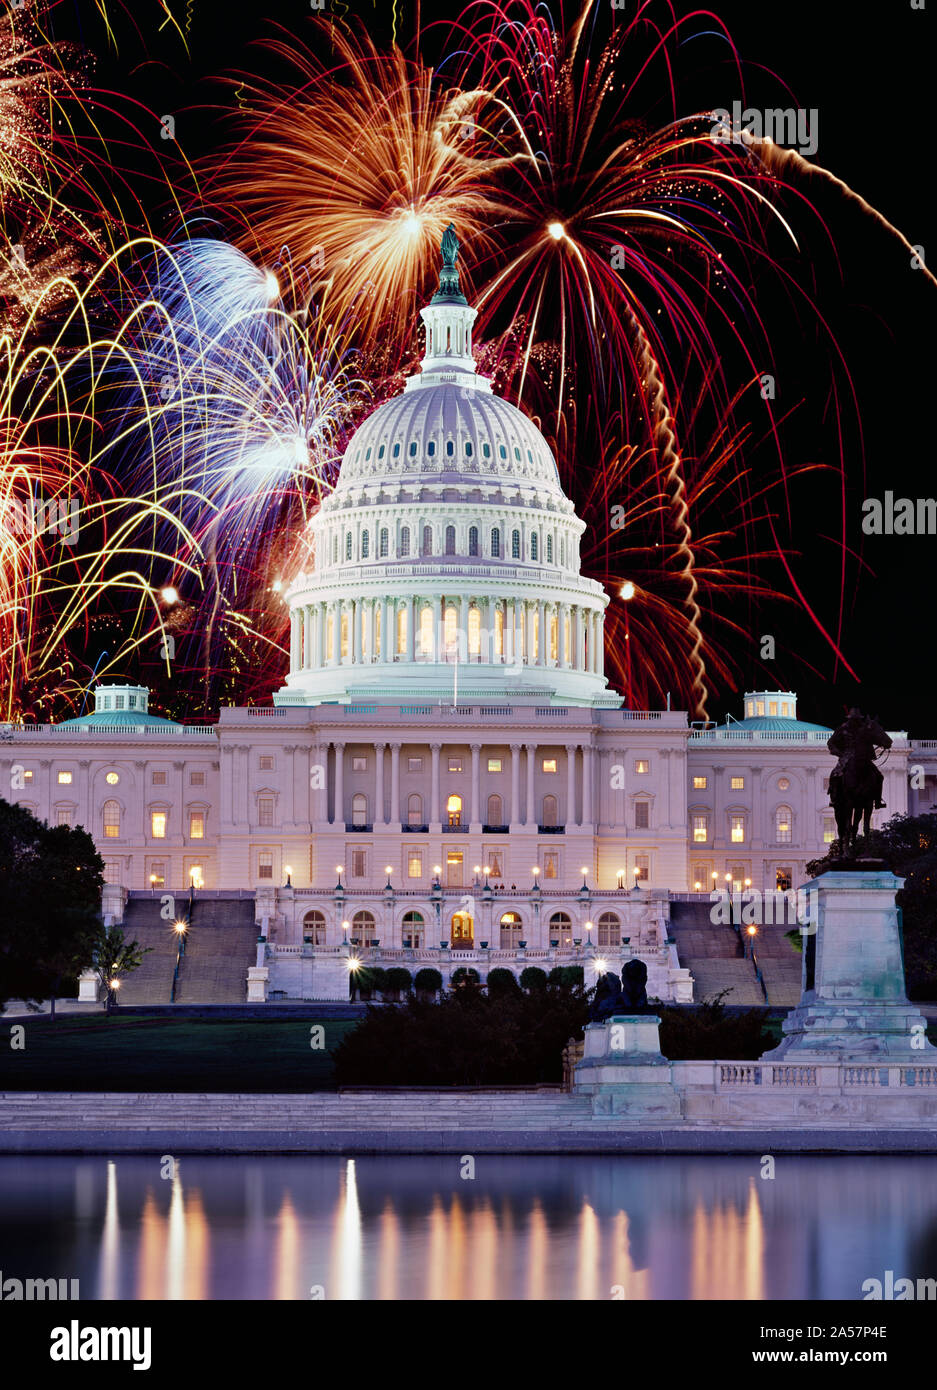 Digital Composite, Firework display over a government building at night, Capitol Building, Capitol Hill, Washington DC, USA Stock Photo